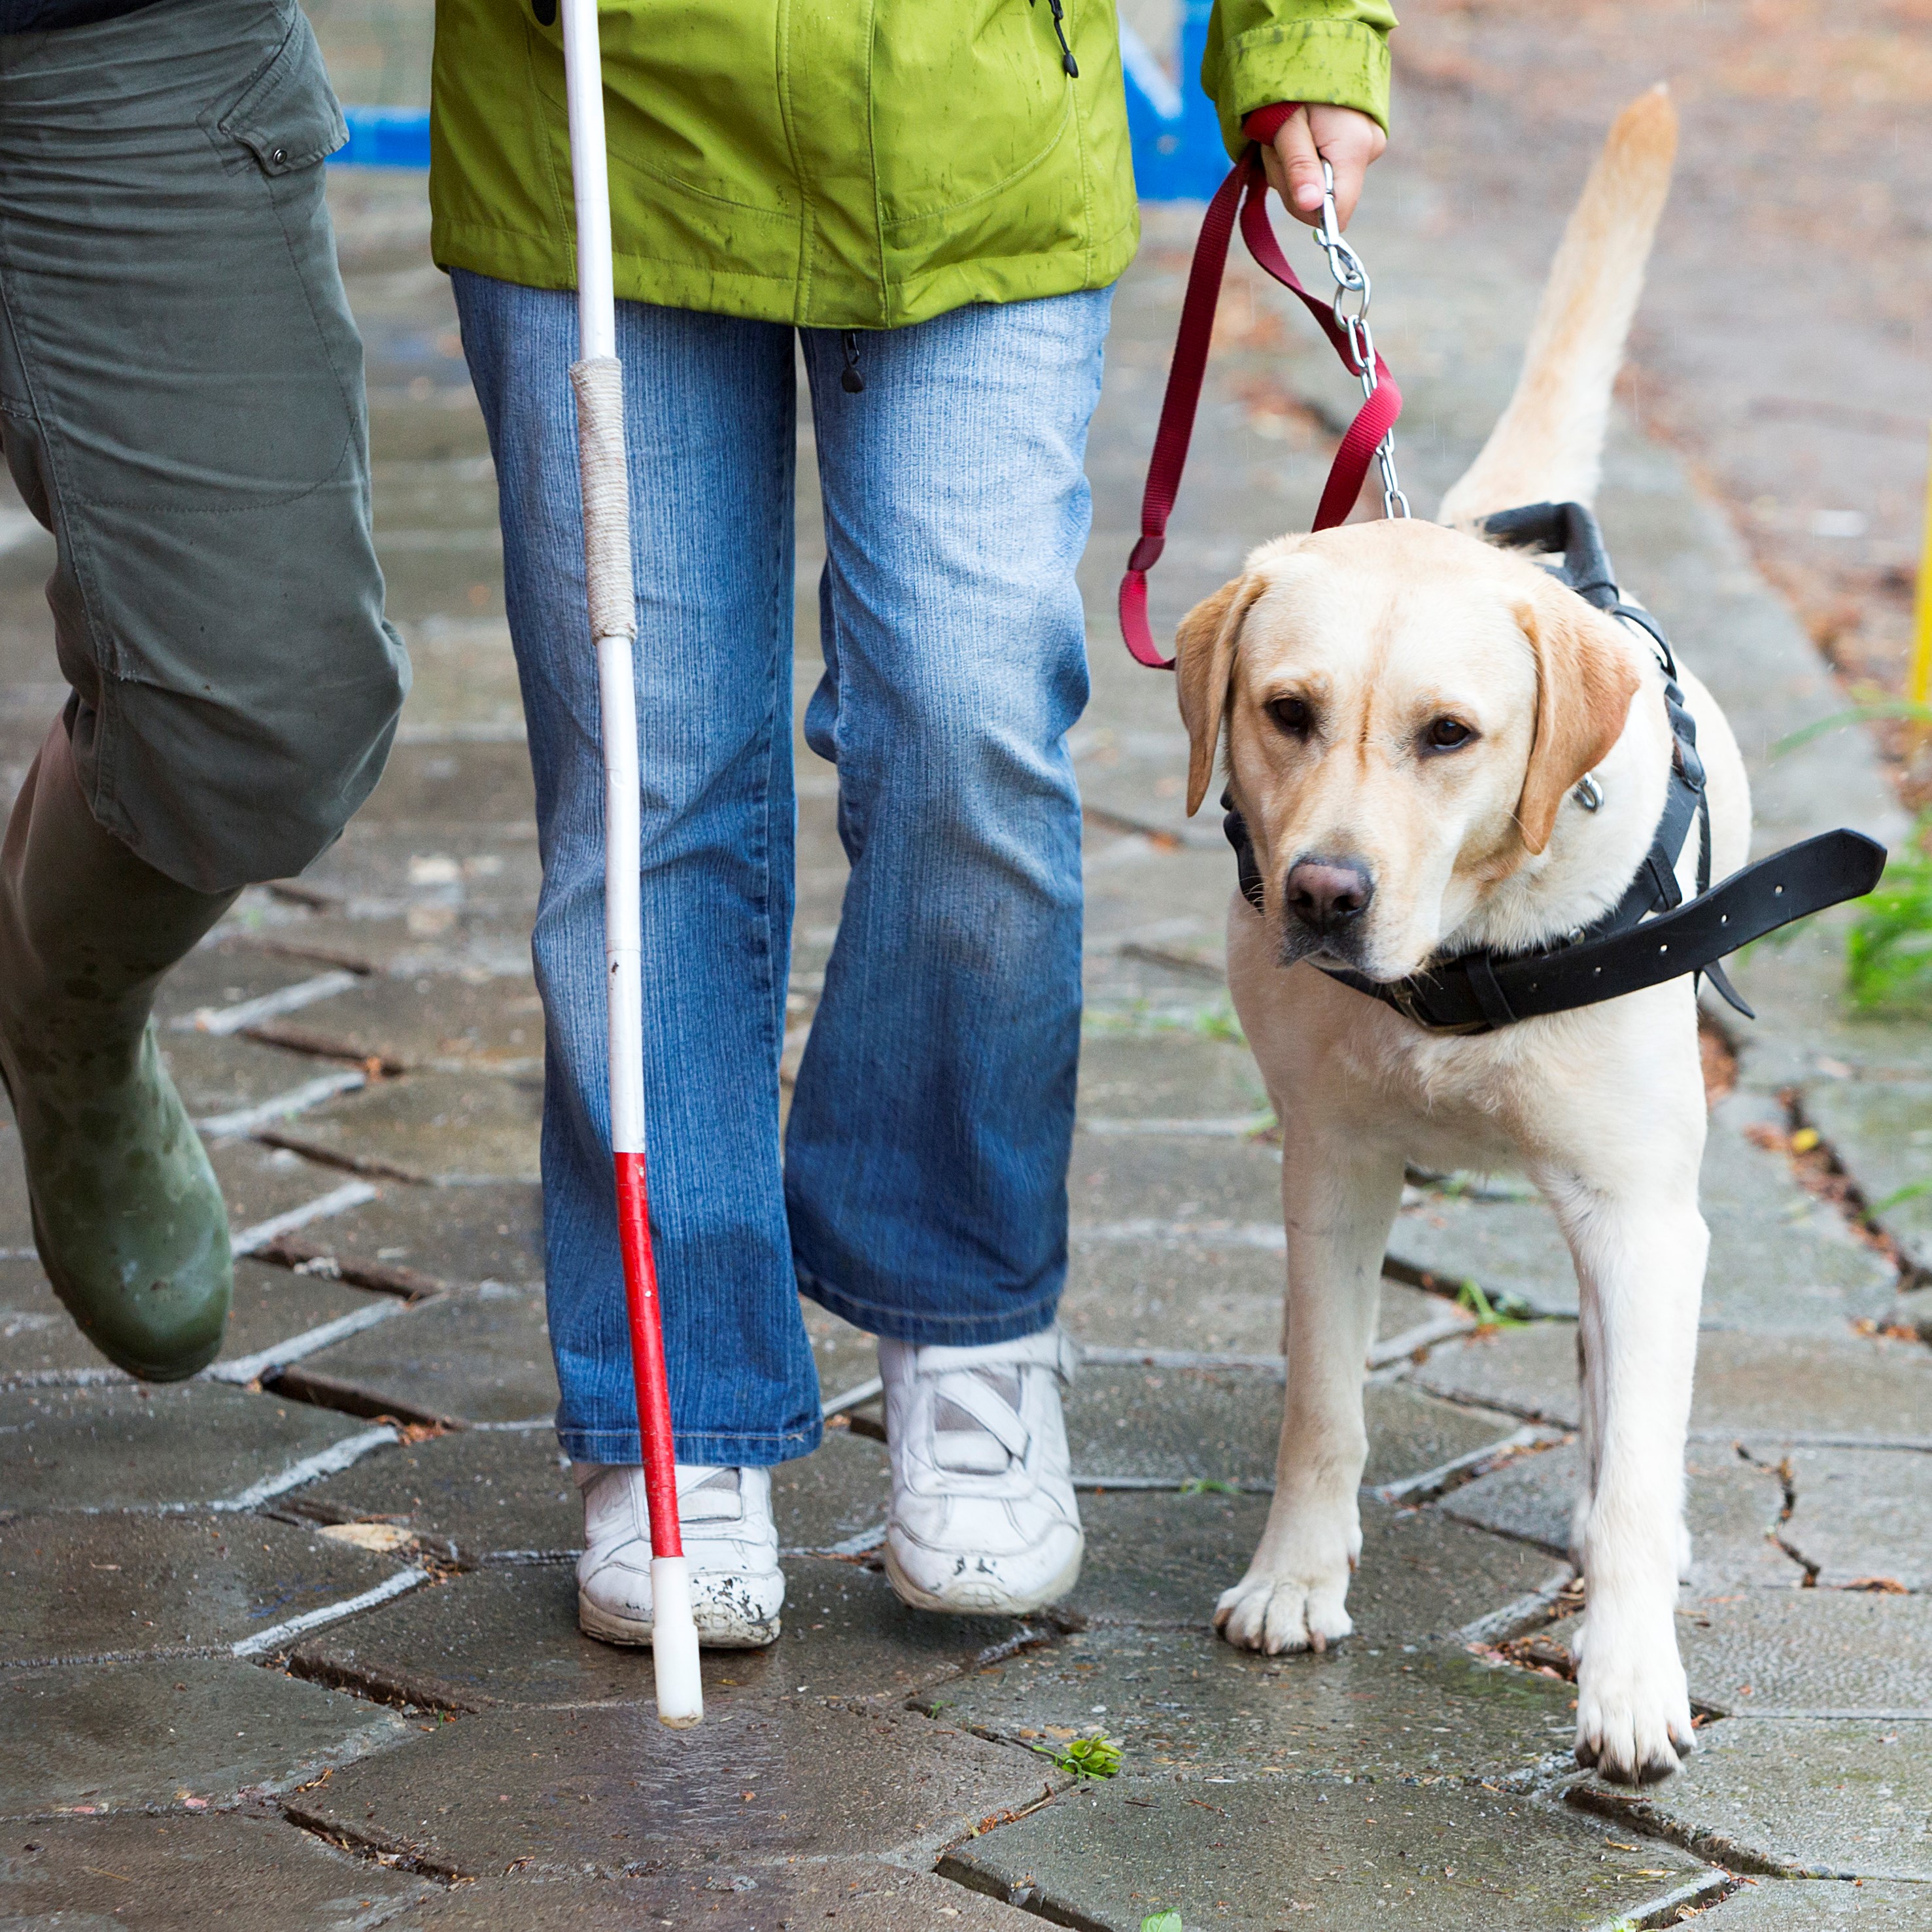 Guide dog walks next to a person. We only see the persons legs. 